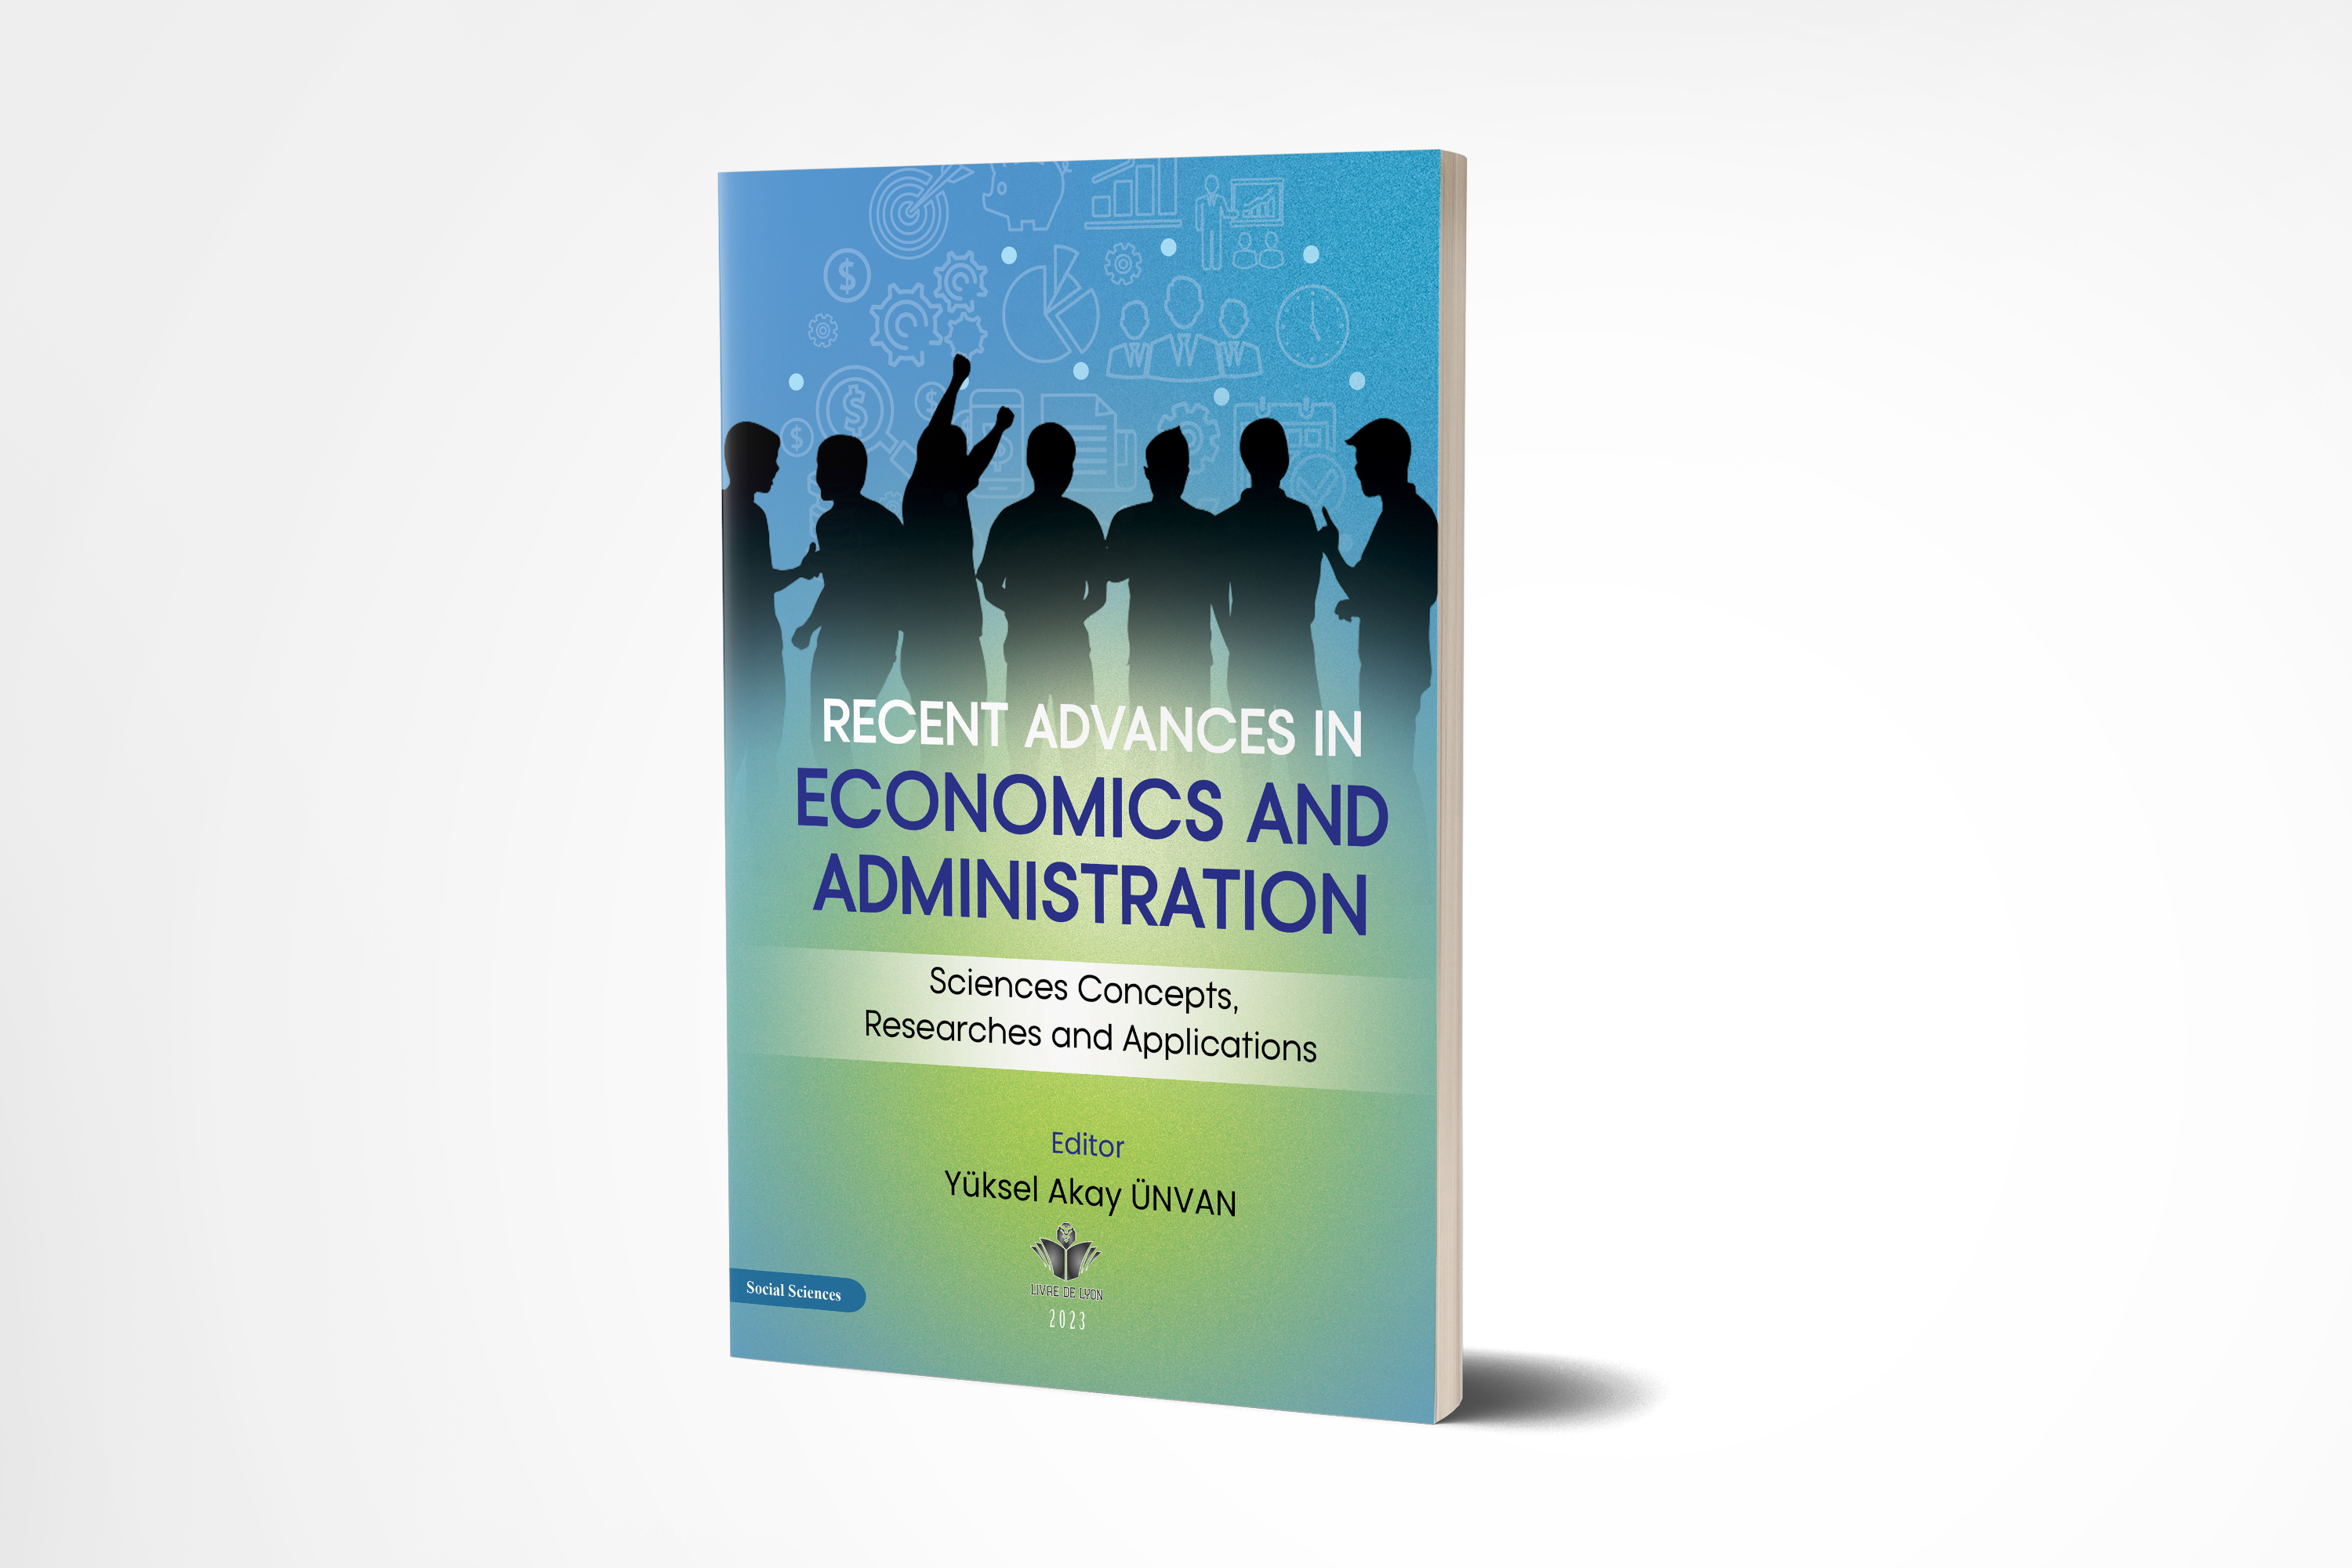 Recent Advances in Economics and Administration Sciences Concepts, Researches and Applications